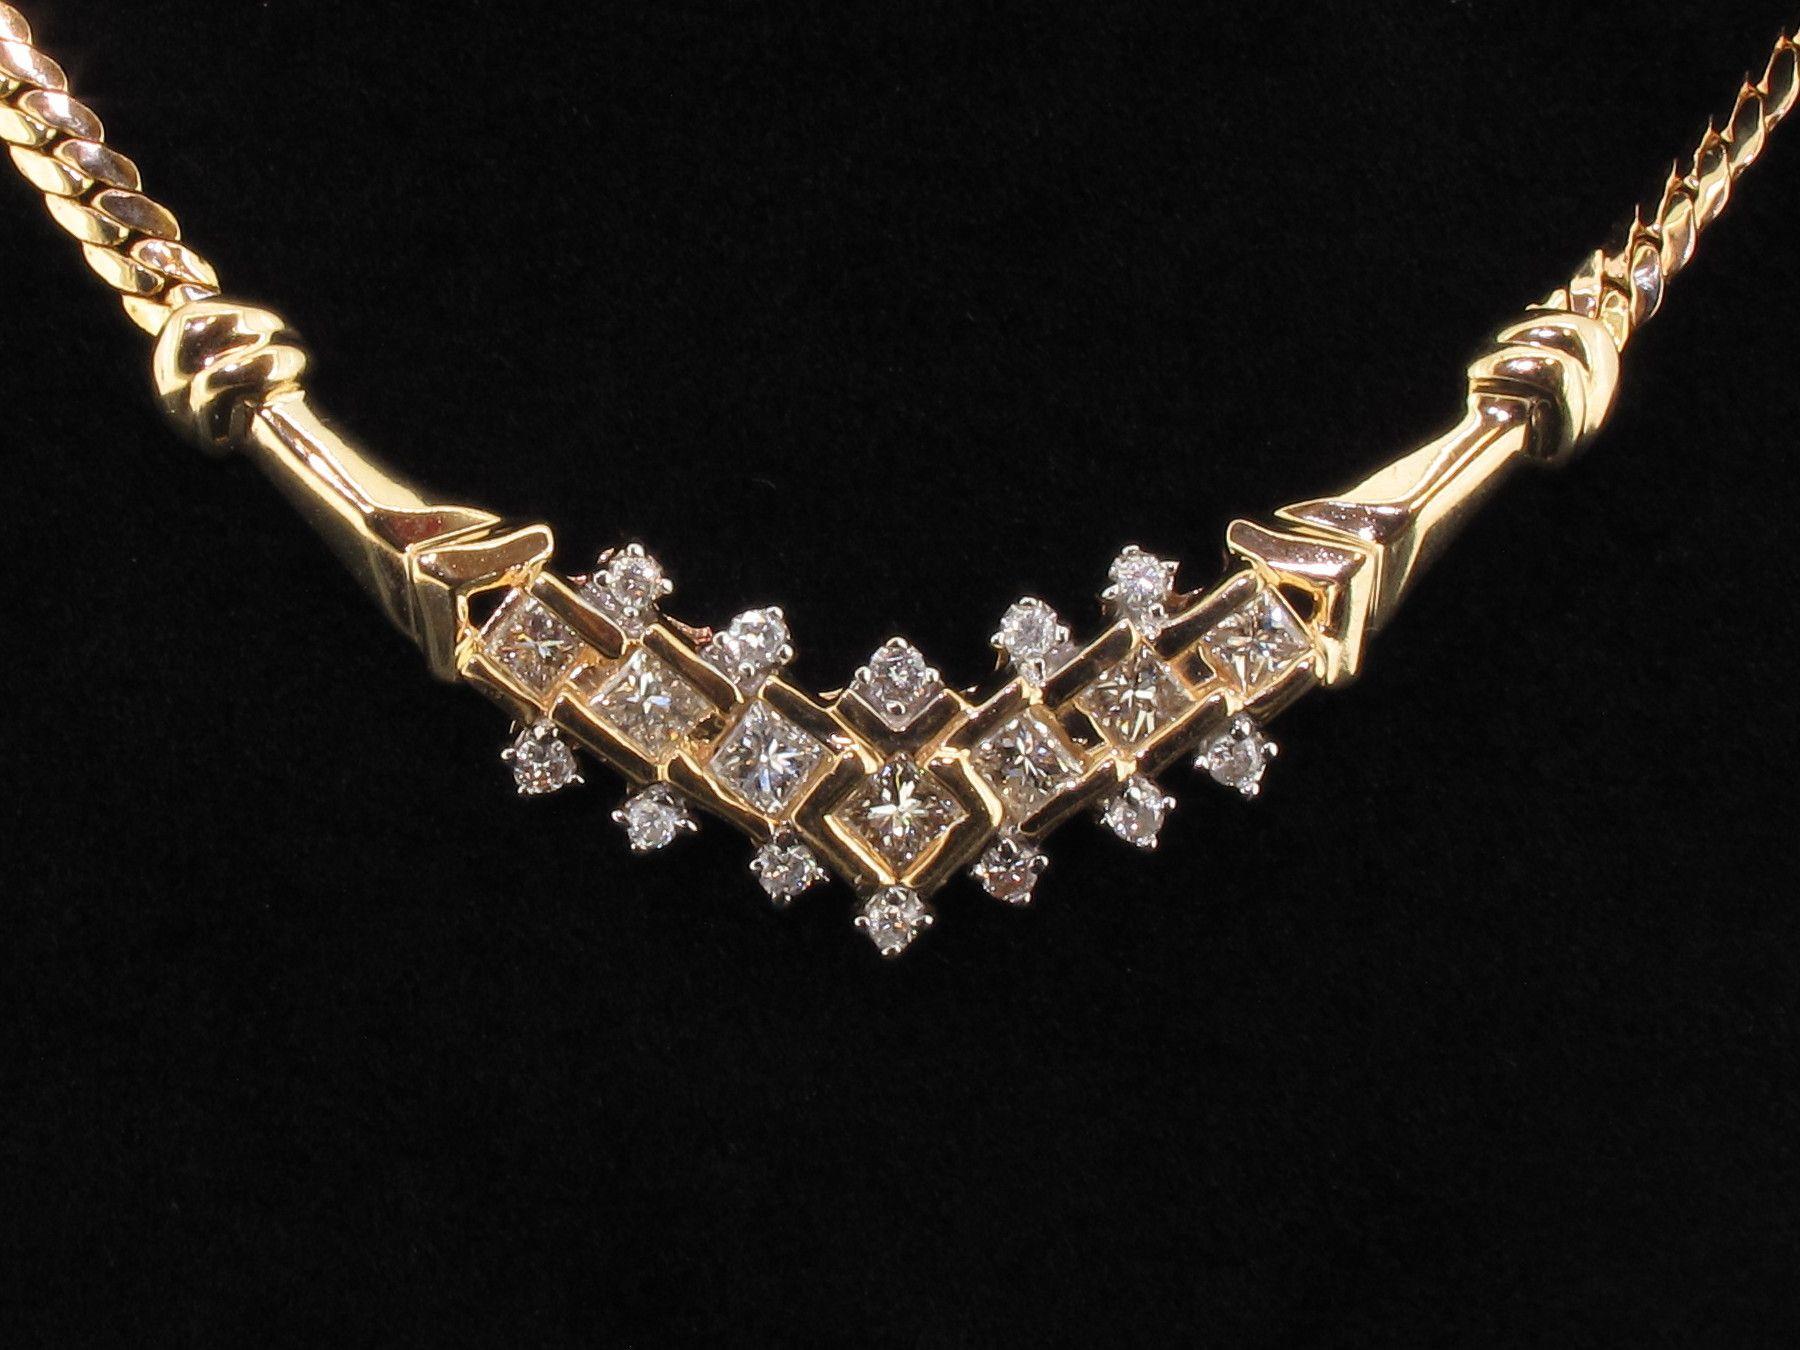 Jewelry Diamond Necklaces Hd Wallpaper High Resolution Jewelry Best Image